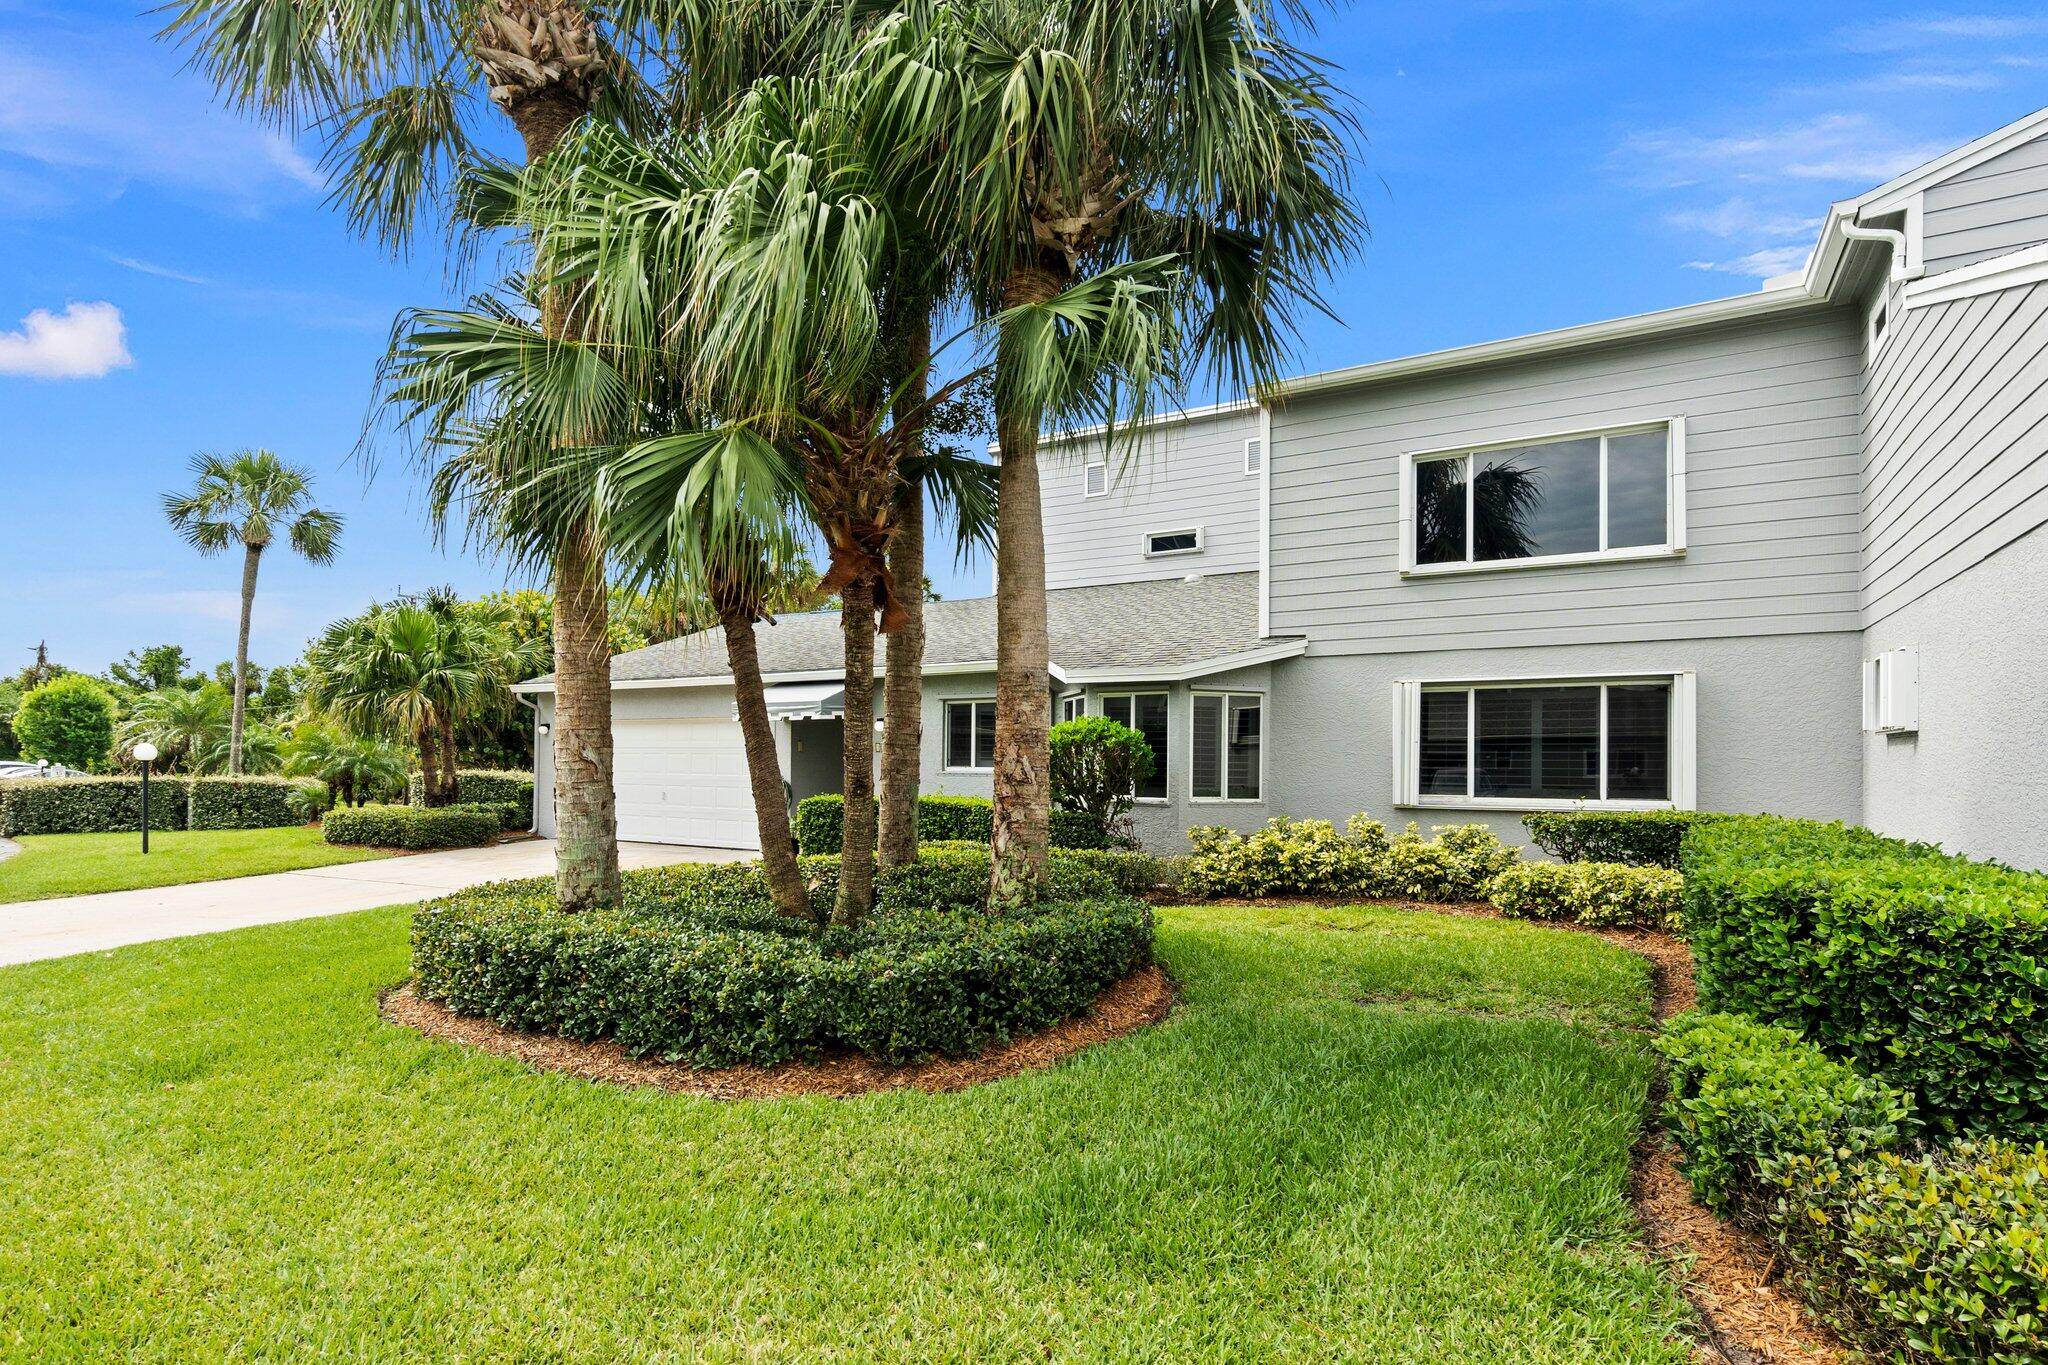 Breakers Landing Super spacious, fully furnished 3 bedroom, 3 bath, 2 car garage condo located on Hutchinson Island with private beach access located right across the street.